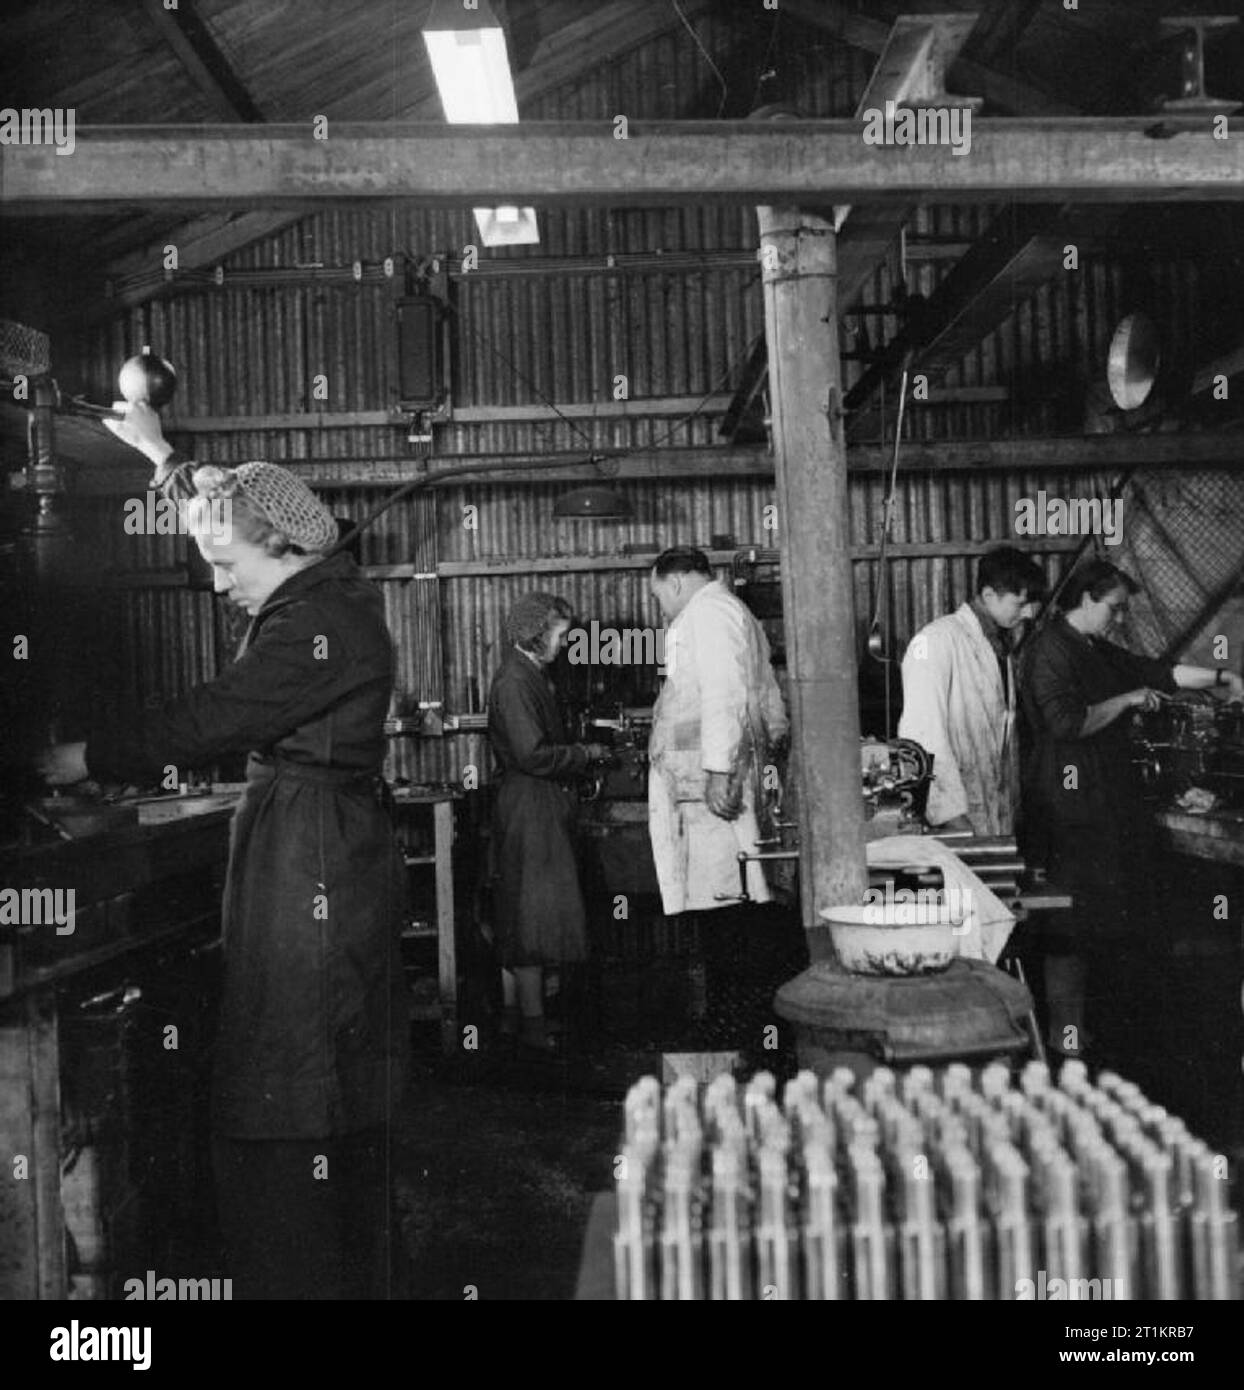 Sten Gun Production in Britain, 1943 Mrs Lushby (left) and colleagues at work in a small 'factory' producing breech blocks from steel bars. This 'factory', previously used as a hen house, was owned by Mr C W (Charles) Packard, an engineer and former haulage contractor, and was probably in Welwyn Garden City. In the foreground, rows of finished 'block pieces' can be seen, ready for the next stage of production. Stock Photo